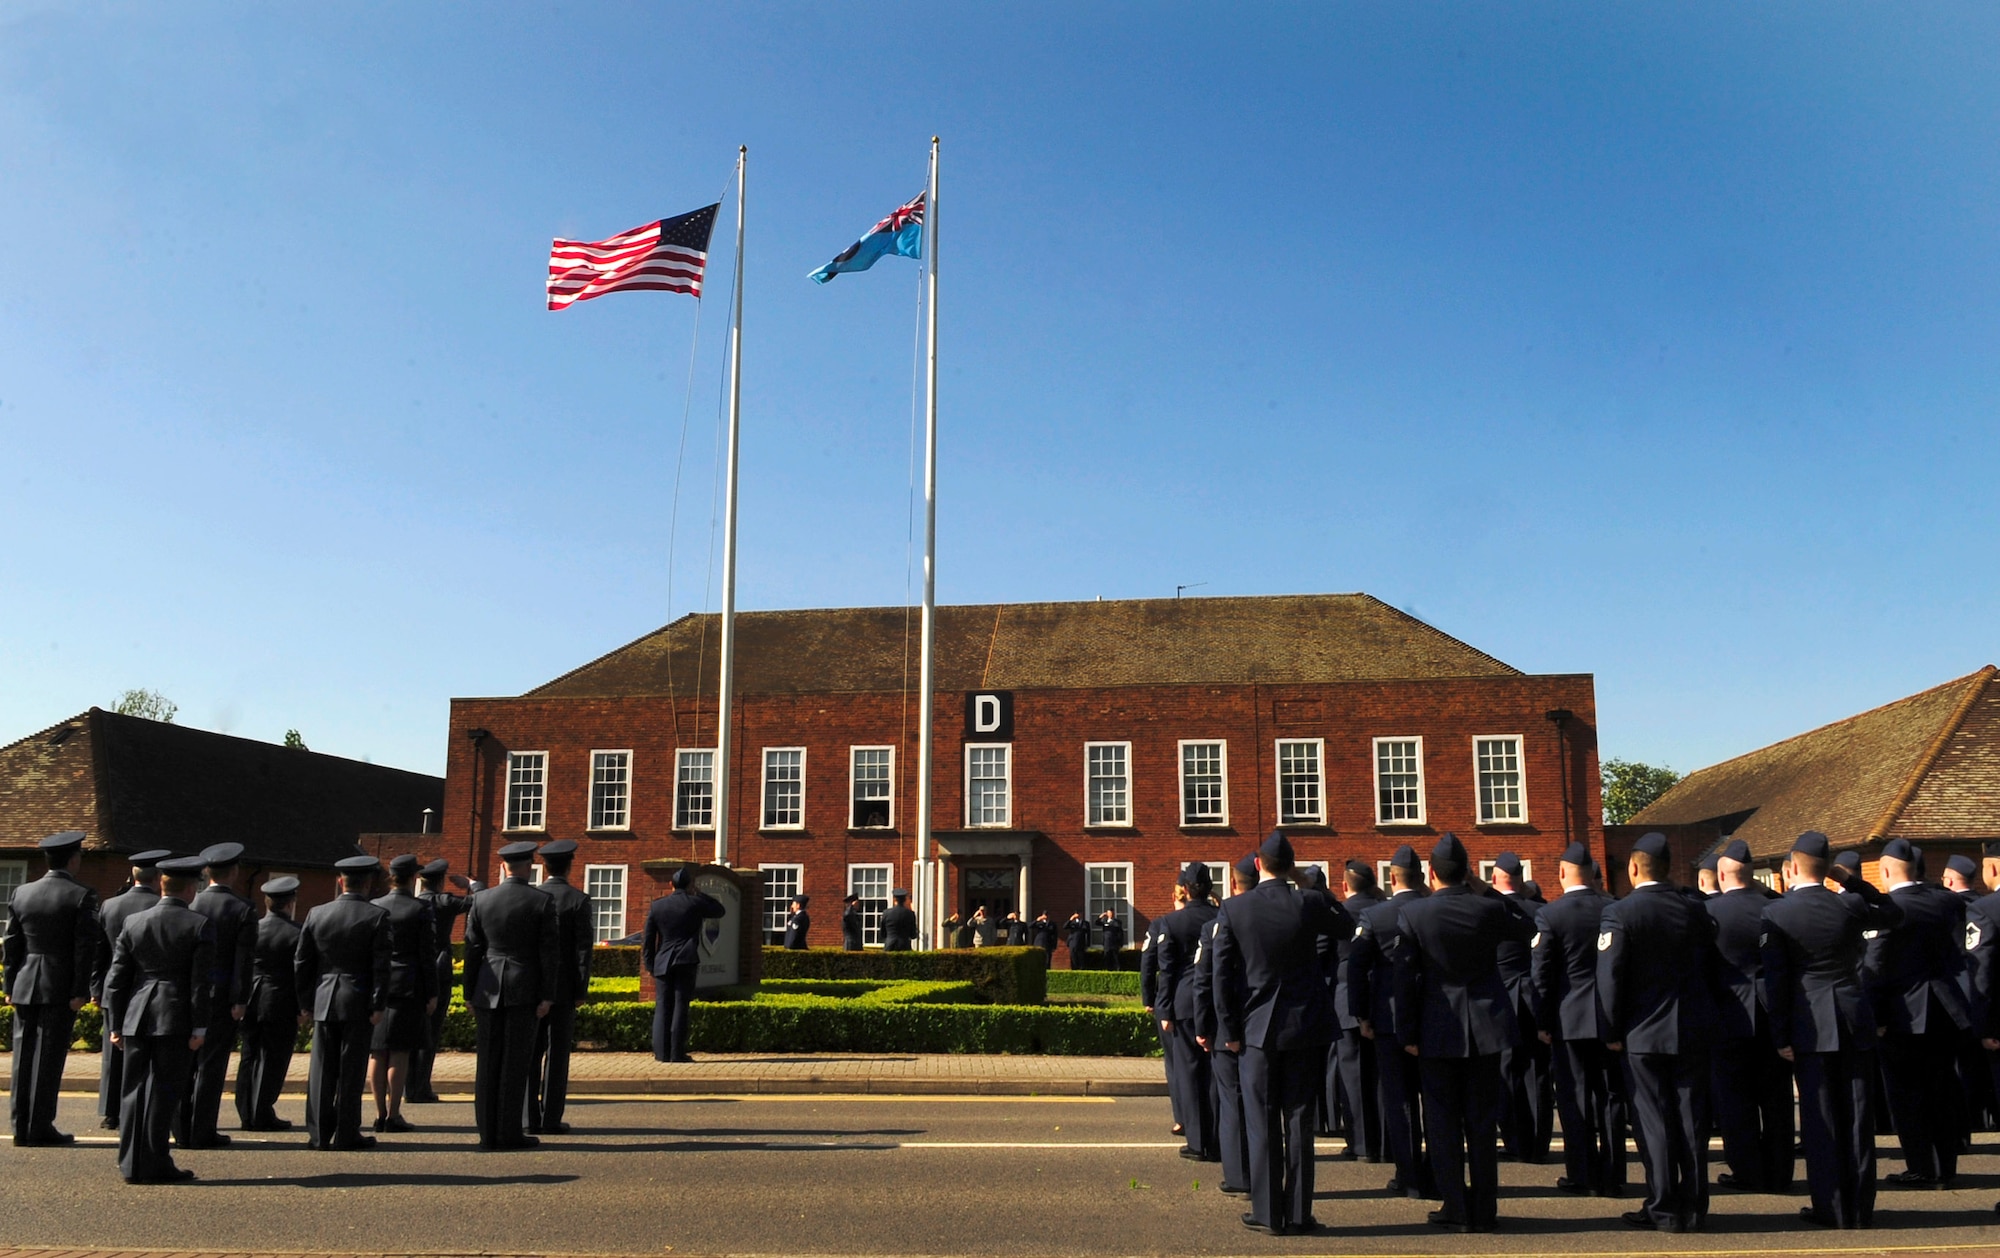 RAF MILDENHALL, England – Team Mildenhall Airmen from the 488th Intelligence Squadron and 95th Reconnaissance Squadron and British airmen from the 51 Squadron, Royal Air Force Waddington, salute as both the American flag and the Royal Air Force Ensign are prepared to be lowered in a retreat ceremony here, May 25, 2012. Retreat signals the end of the duty day, while also paying respect to the flag. (U.S. Air Force photo/Senior Airman Ethan Morgan)  